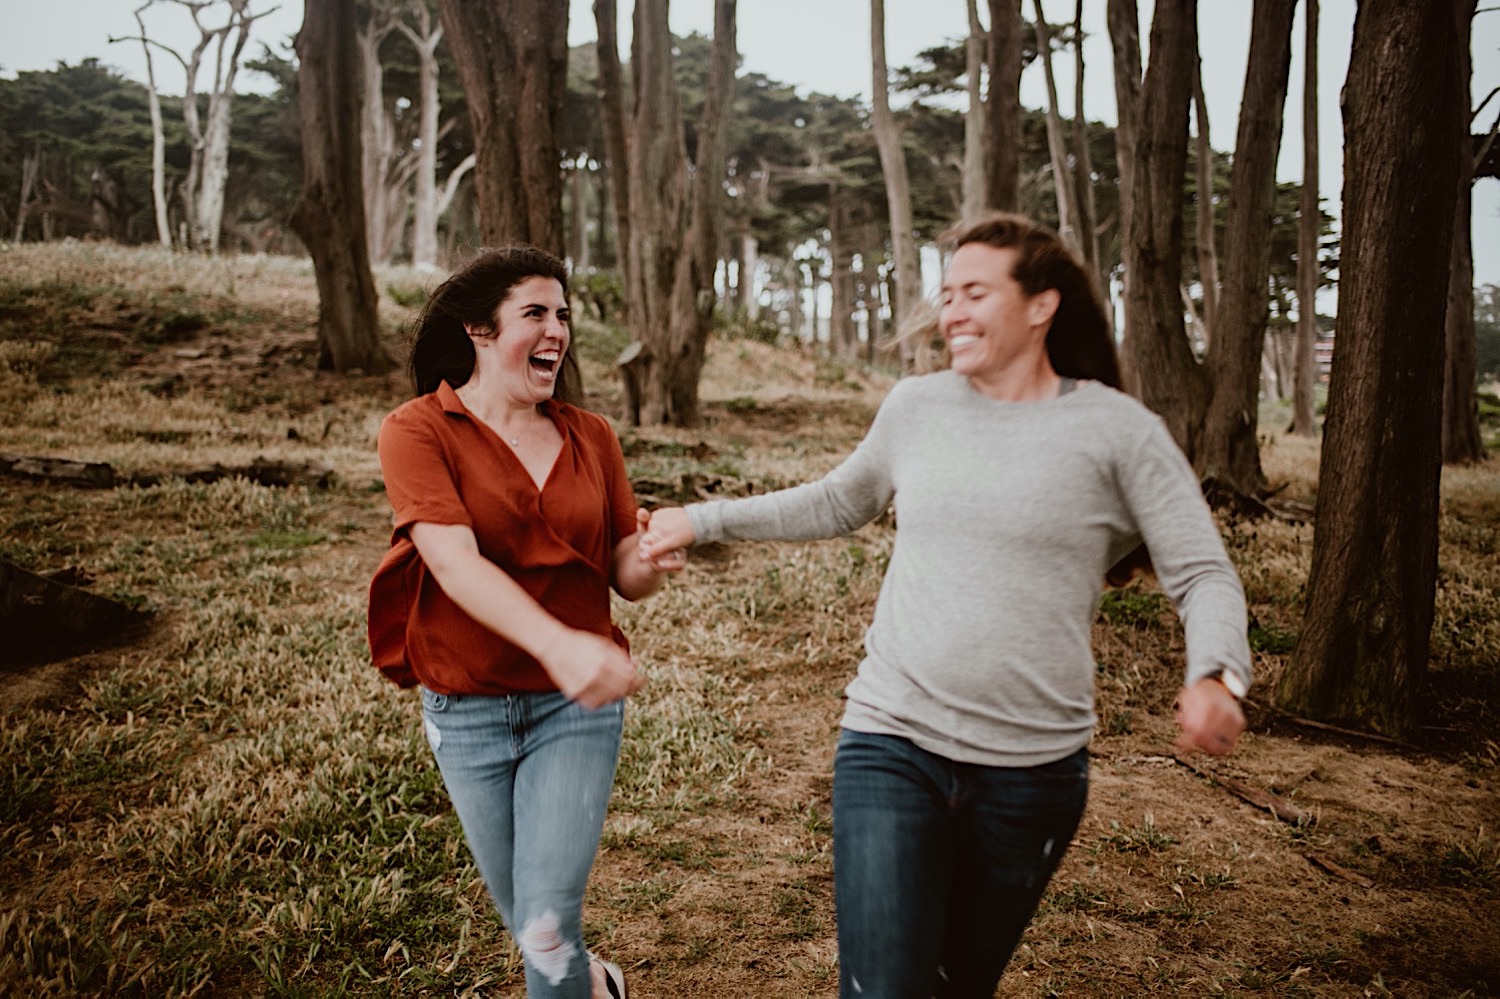 Two women are holding hands and running directly at the photographer, while looking at each other and laughing. The image is slightly blurry. They are in the trees above Sutro Baths in San Francisco for their engagement session. Head to this post to see more photos from my bucket list location!